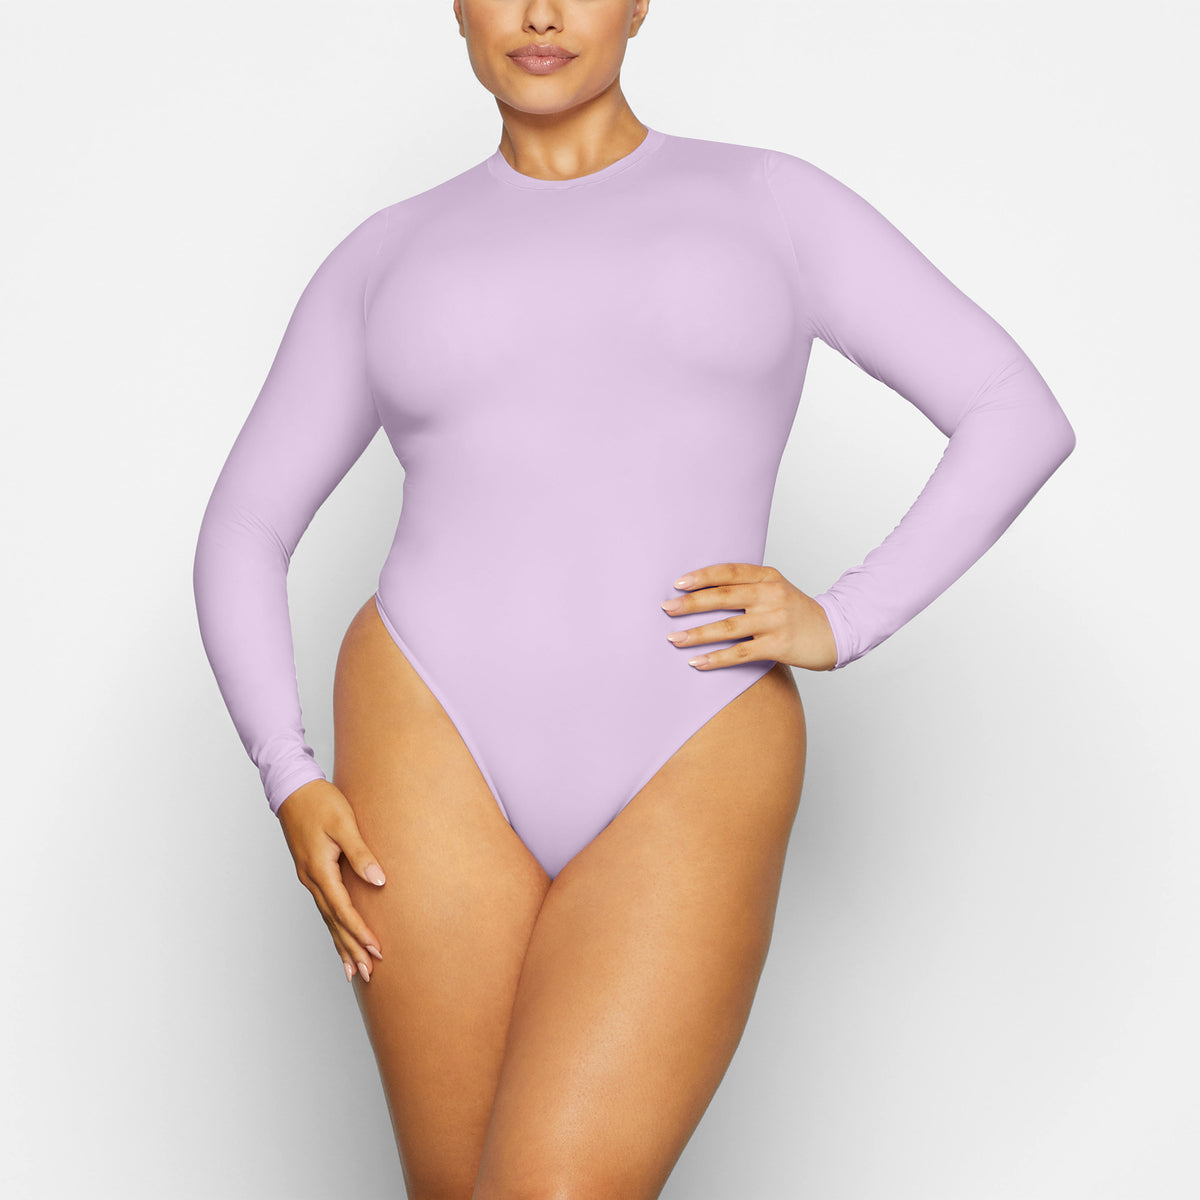 My favorite Skims inspired bodysuit is available in a 3-pack?!?! Let's, Bodysuit